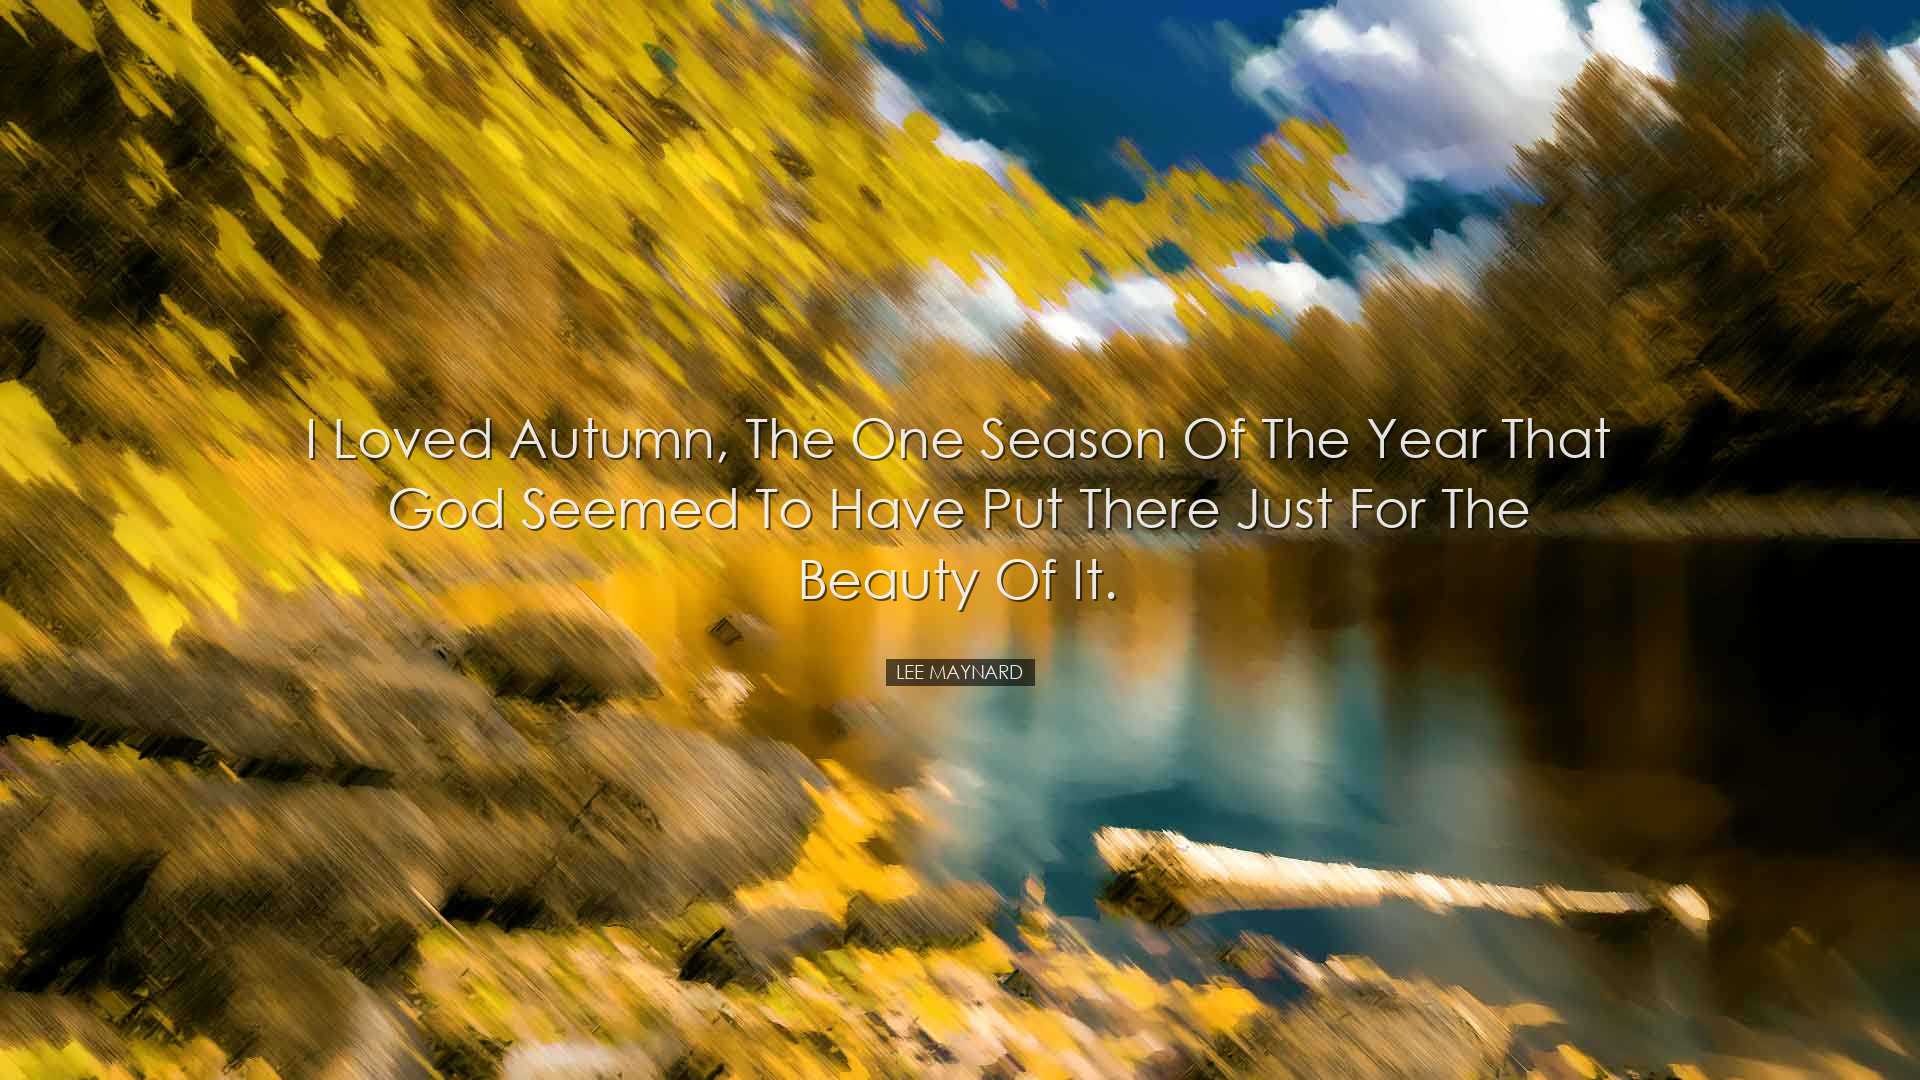 I loved autumn, the one season of the year that God seemed to have